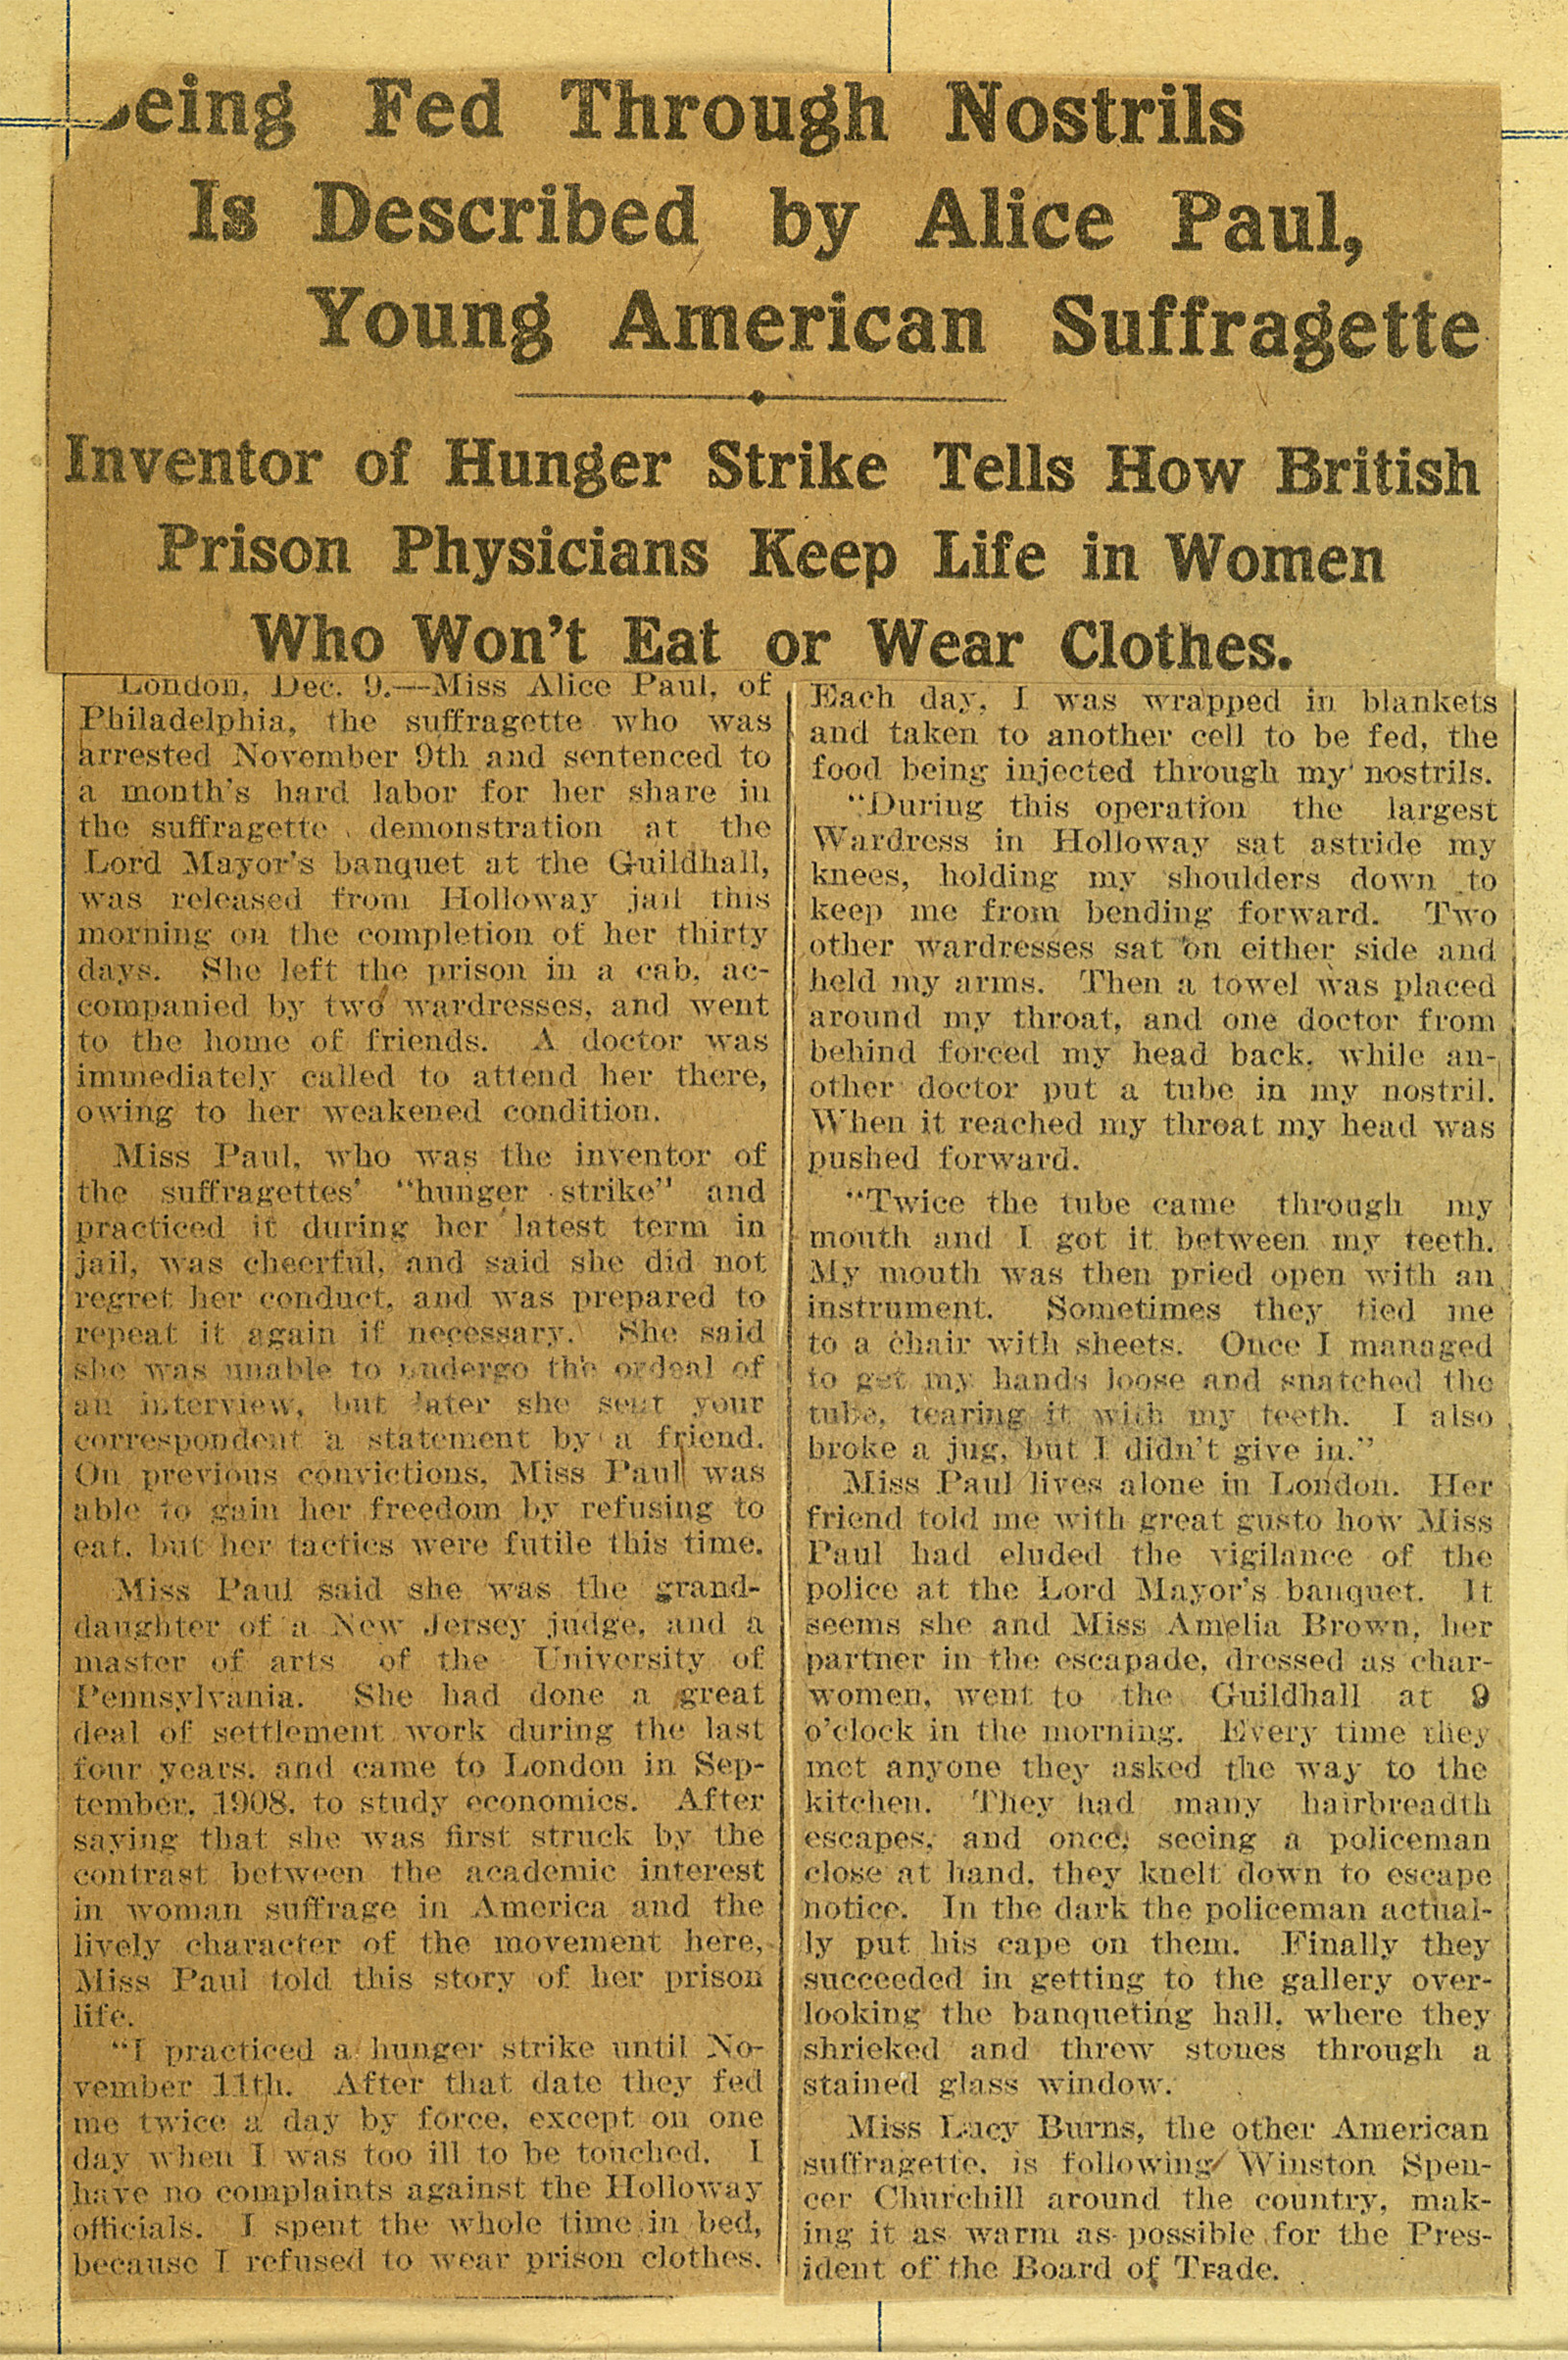 NAWSA Suffrage Scrapbooks, Dec. 9, 1909. Suffragist Alice Paul describes her disruption of Lord Mayor's banquet and subsequent force feeding after hunger strike in Holloway jail. She refused to wear prison clothes or to work, so spent the month in bed. Library of Congress